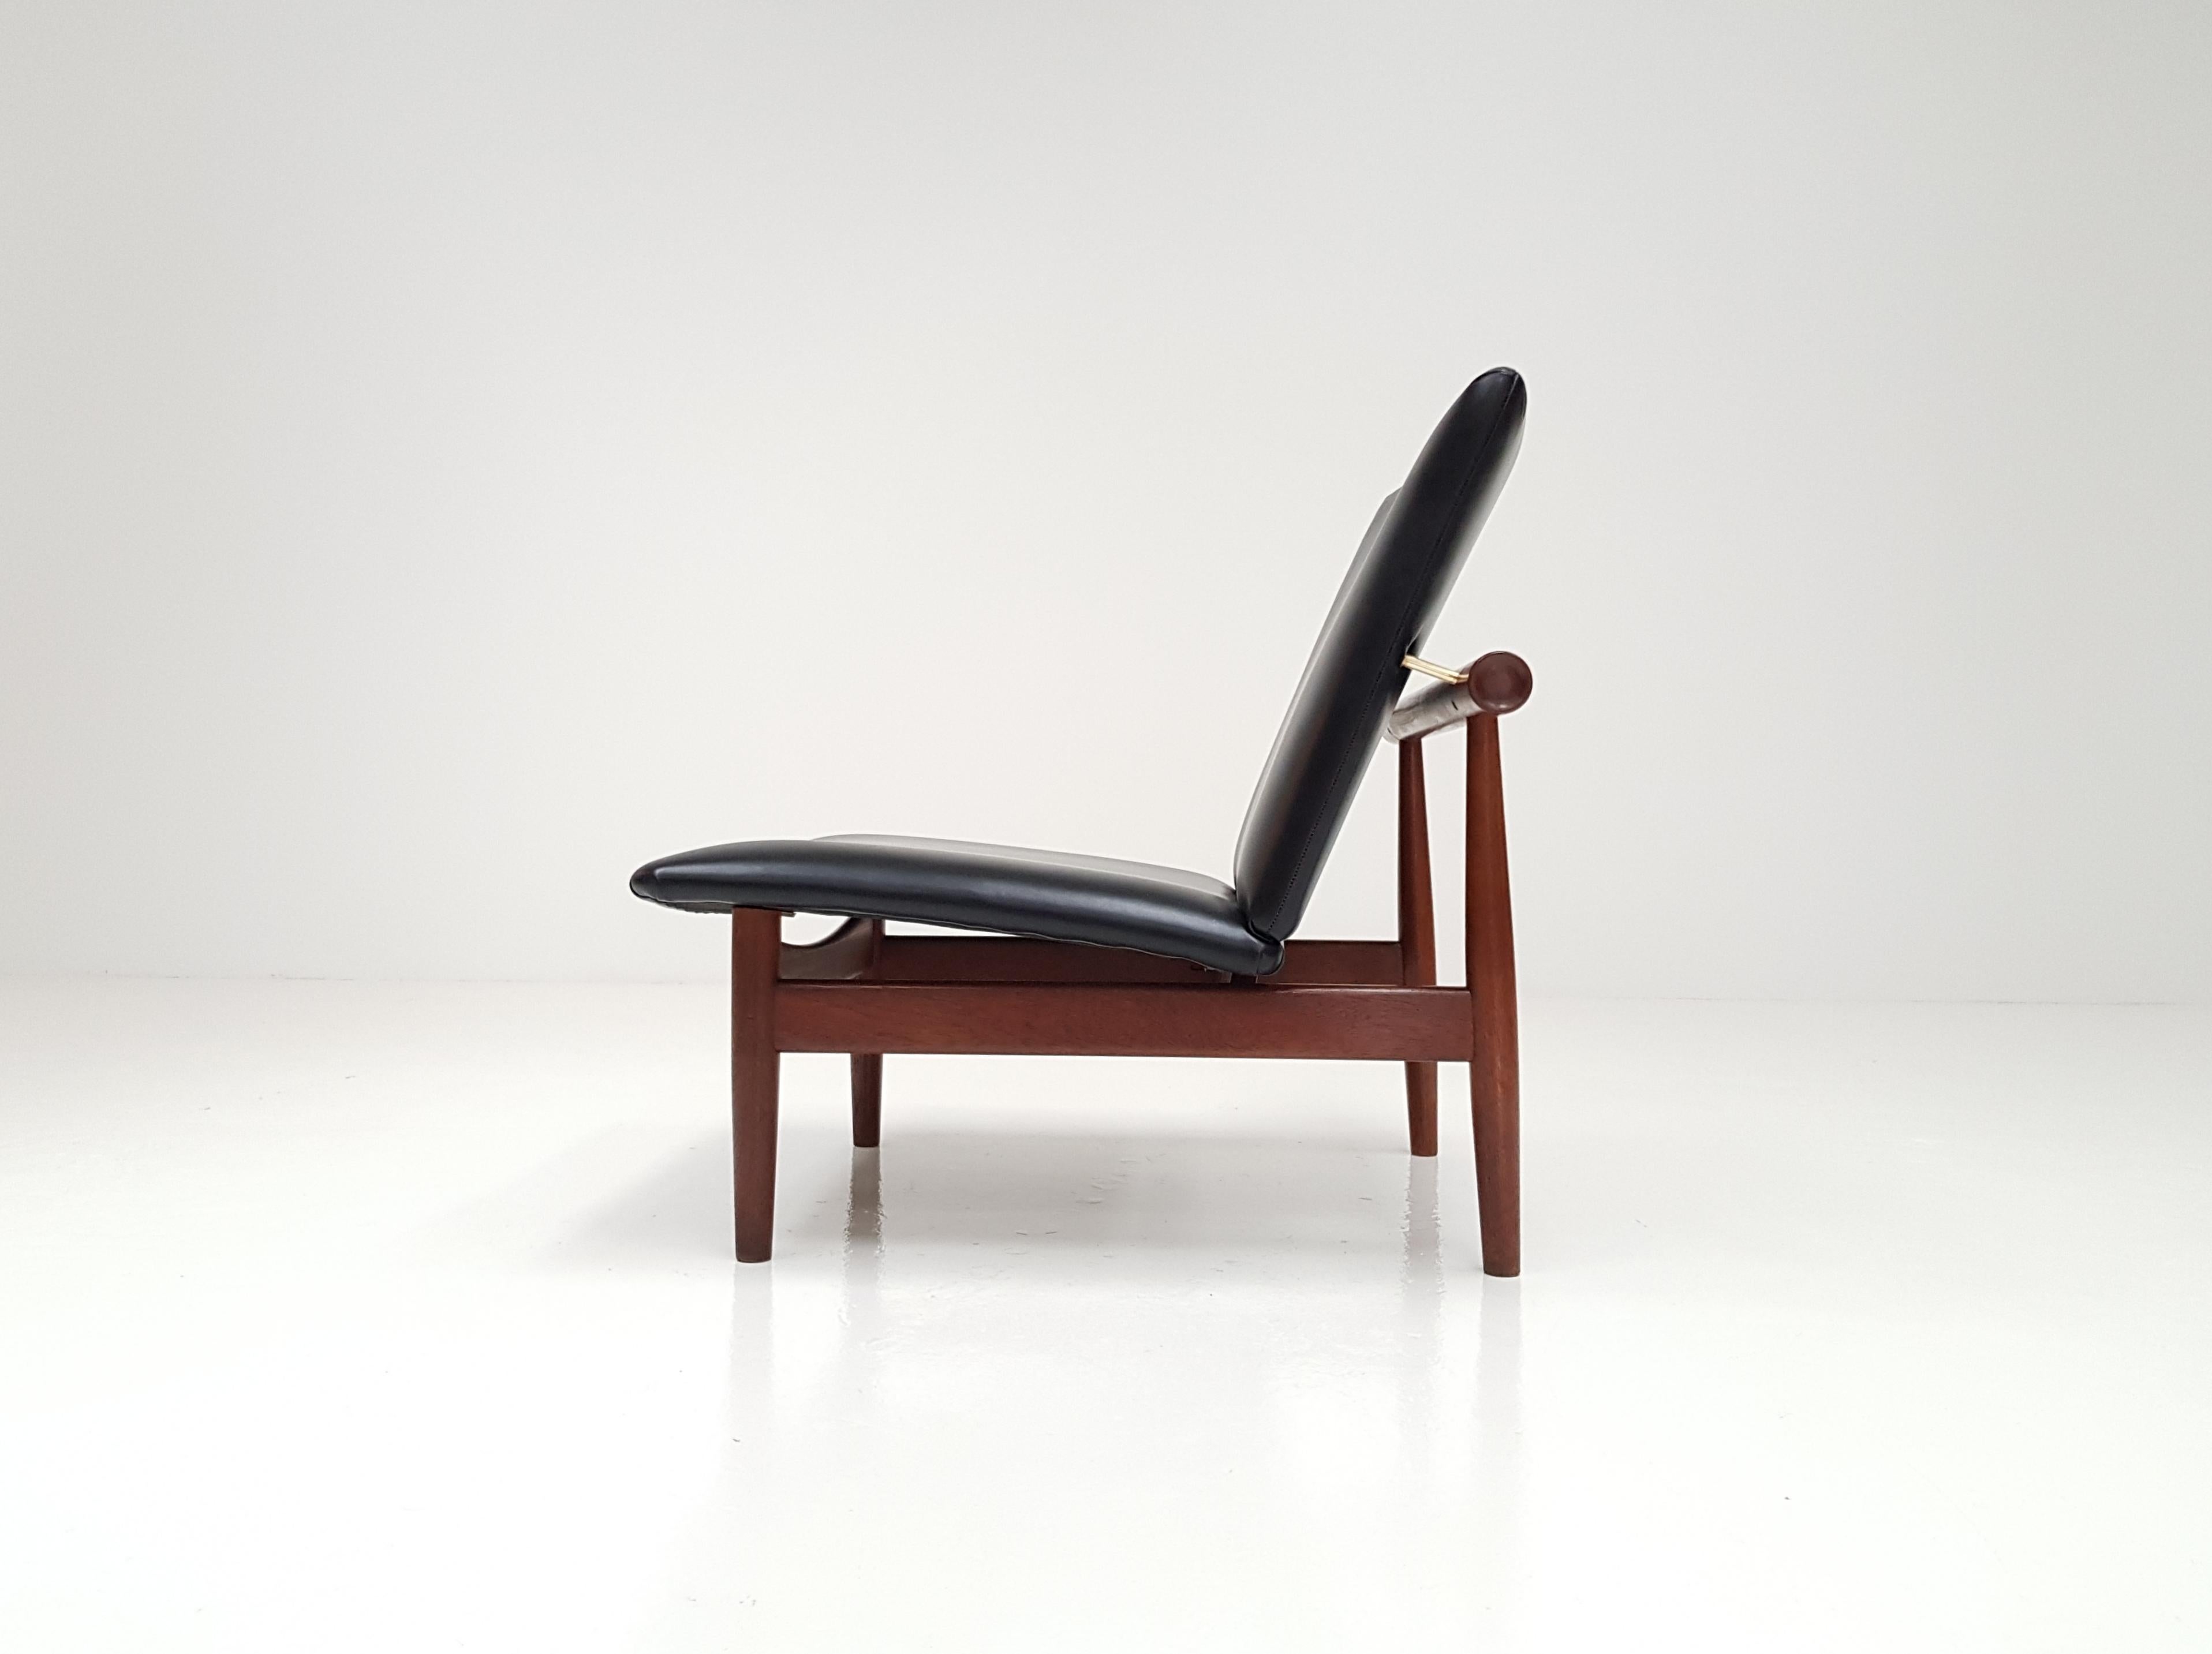 A model 137 lounge chair by Danish Icon Finn Juhl for France and Son, also called the Japan chair from where the chair was inspired.

Fully restored and newly reupholstered in black full grain aniline leather.

    



